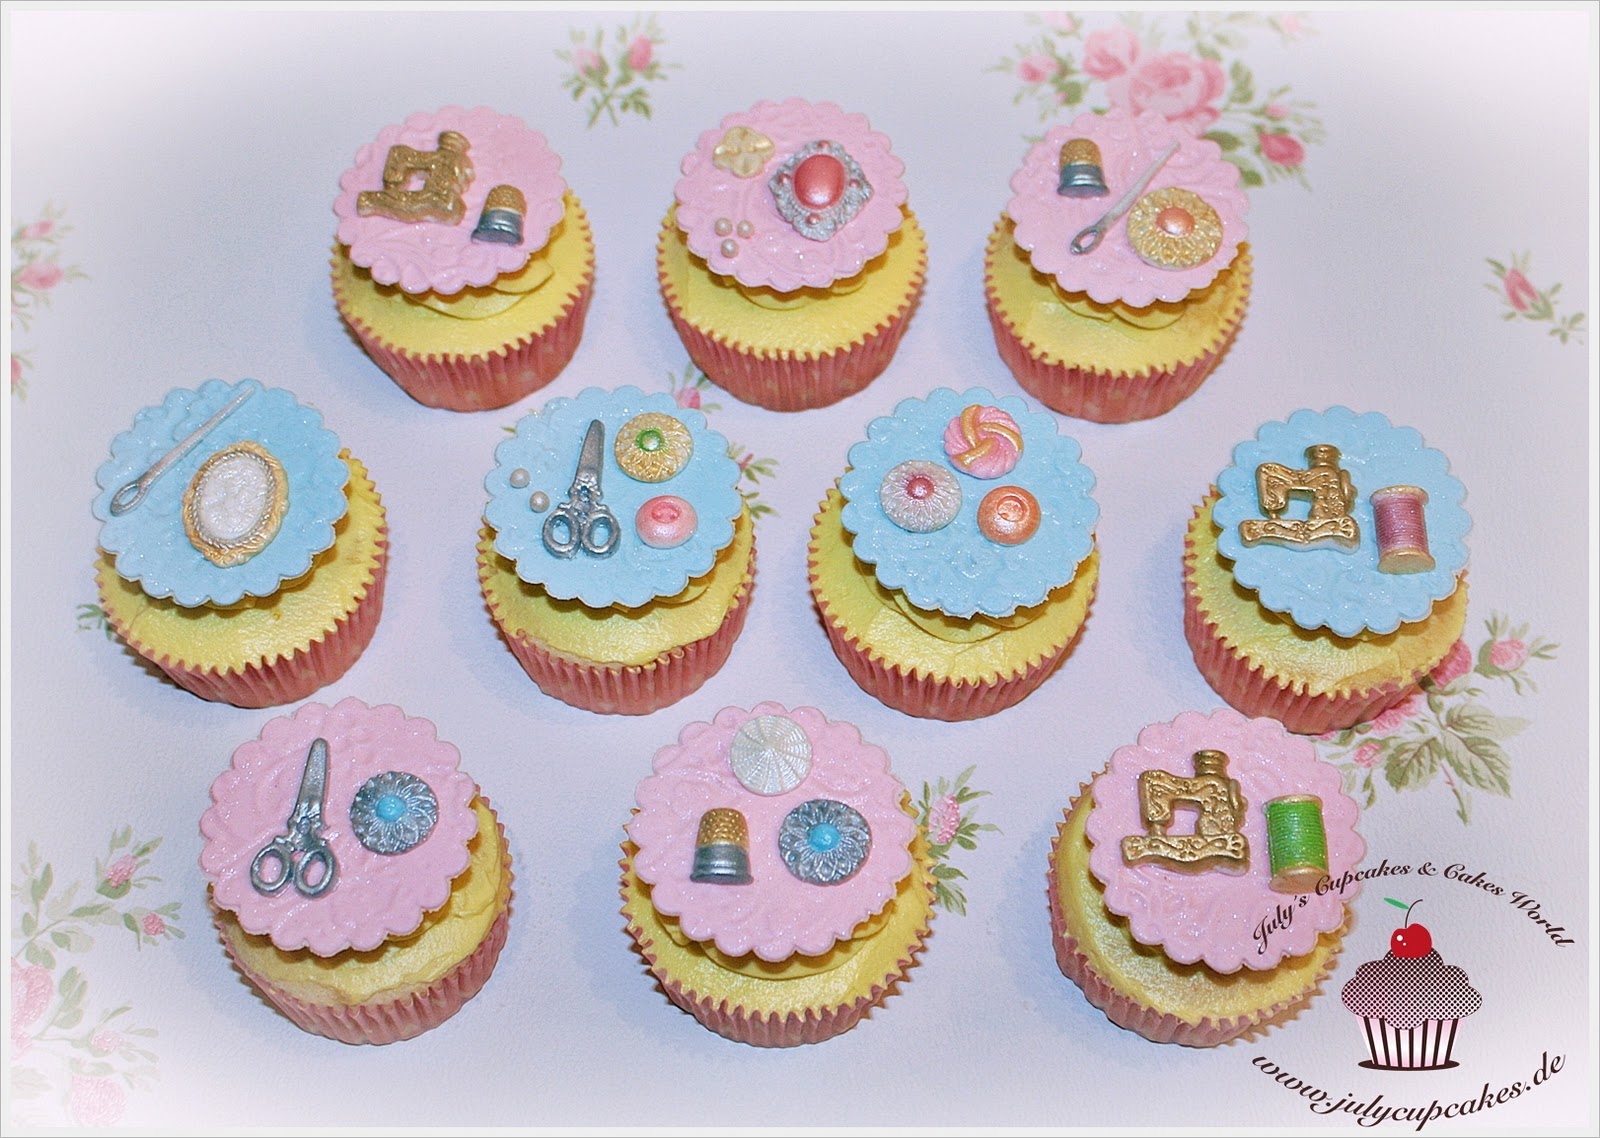 My Cupcakes and Cakes World: Sewing Cupcakes - White Cupcakes